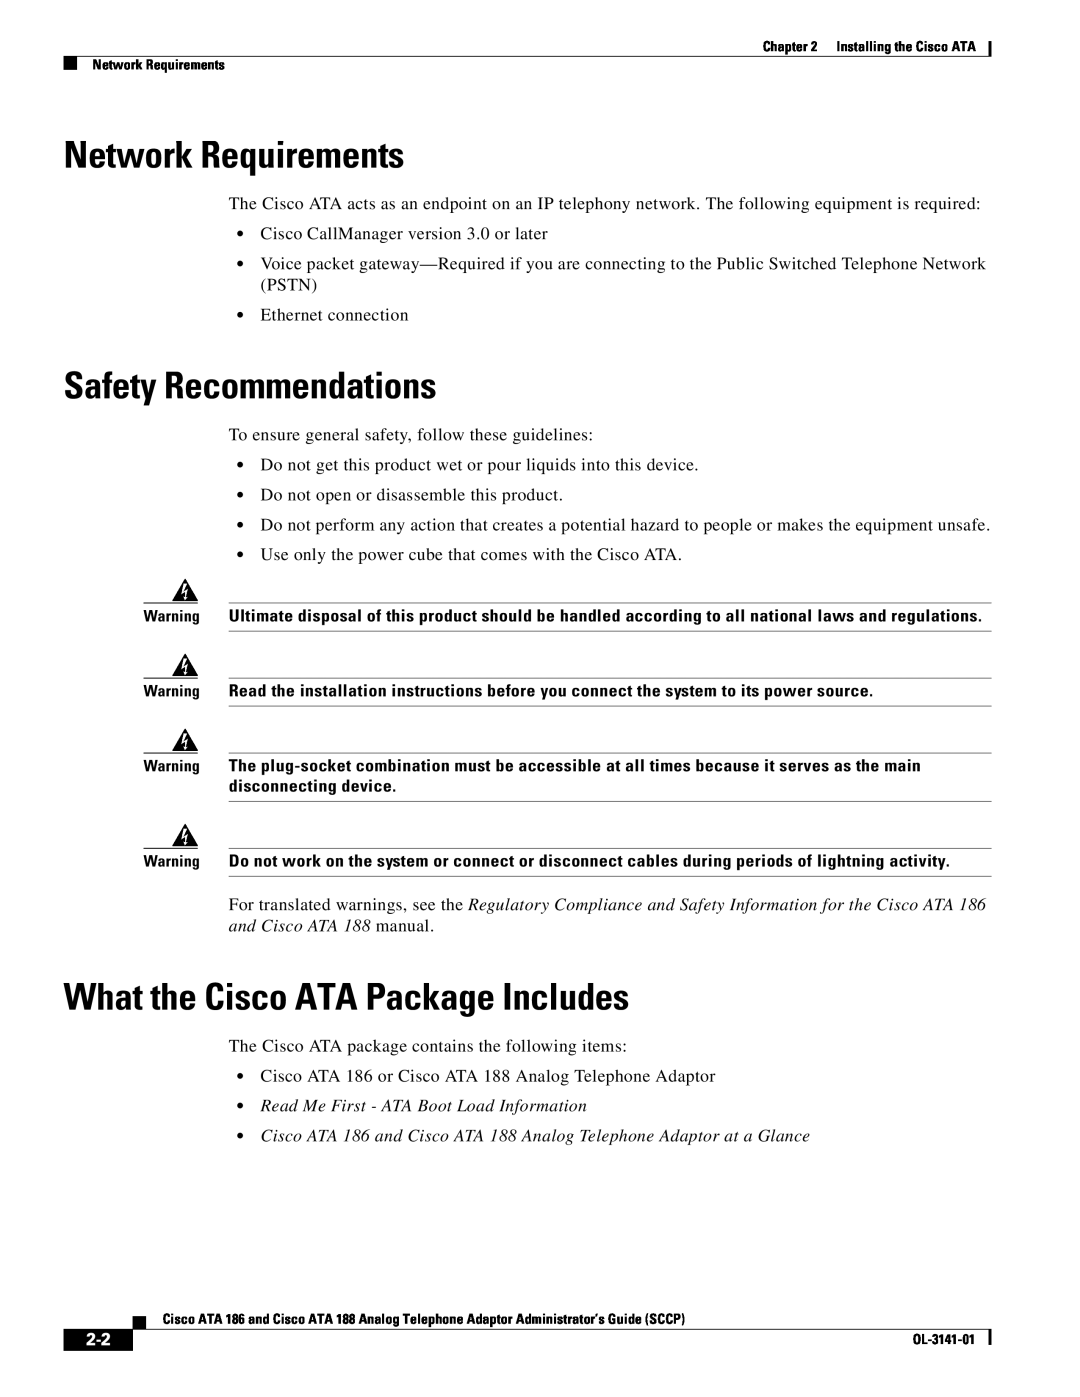 Cisco Systems ATA 186, ATA 188 manual Network Requirements, Safety Recommendations, What the Cisco ATA Package Includes 